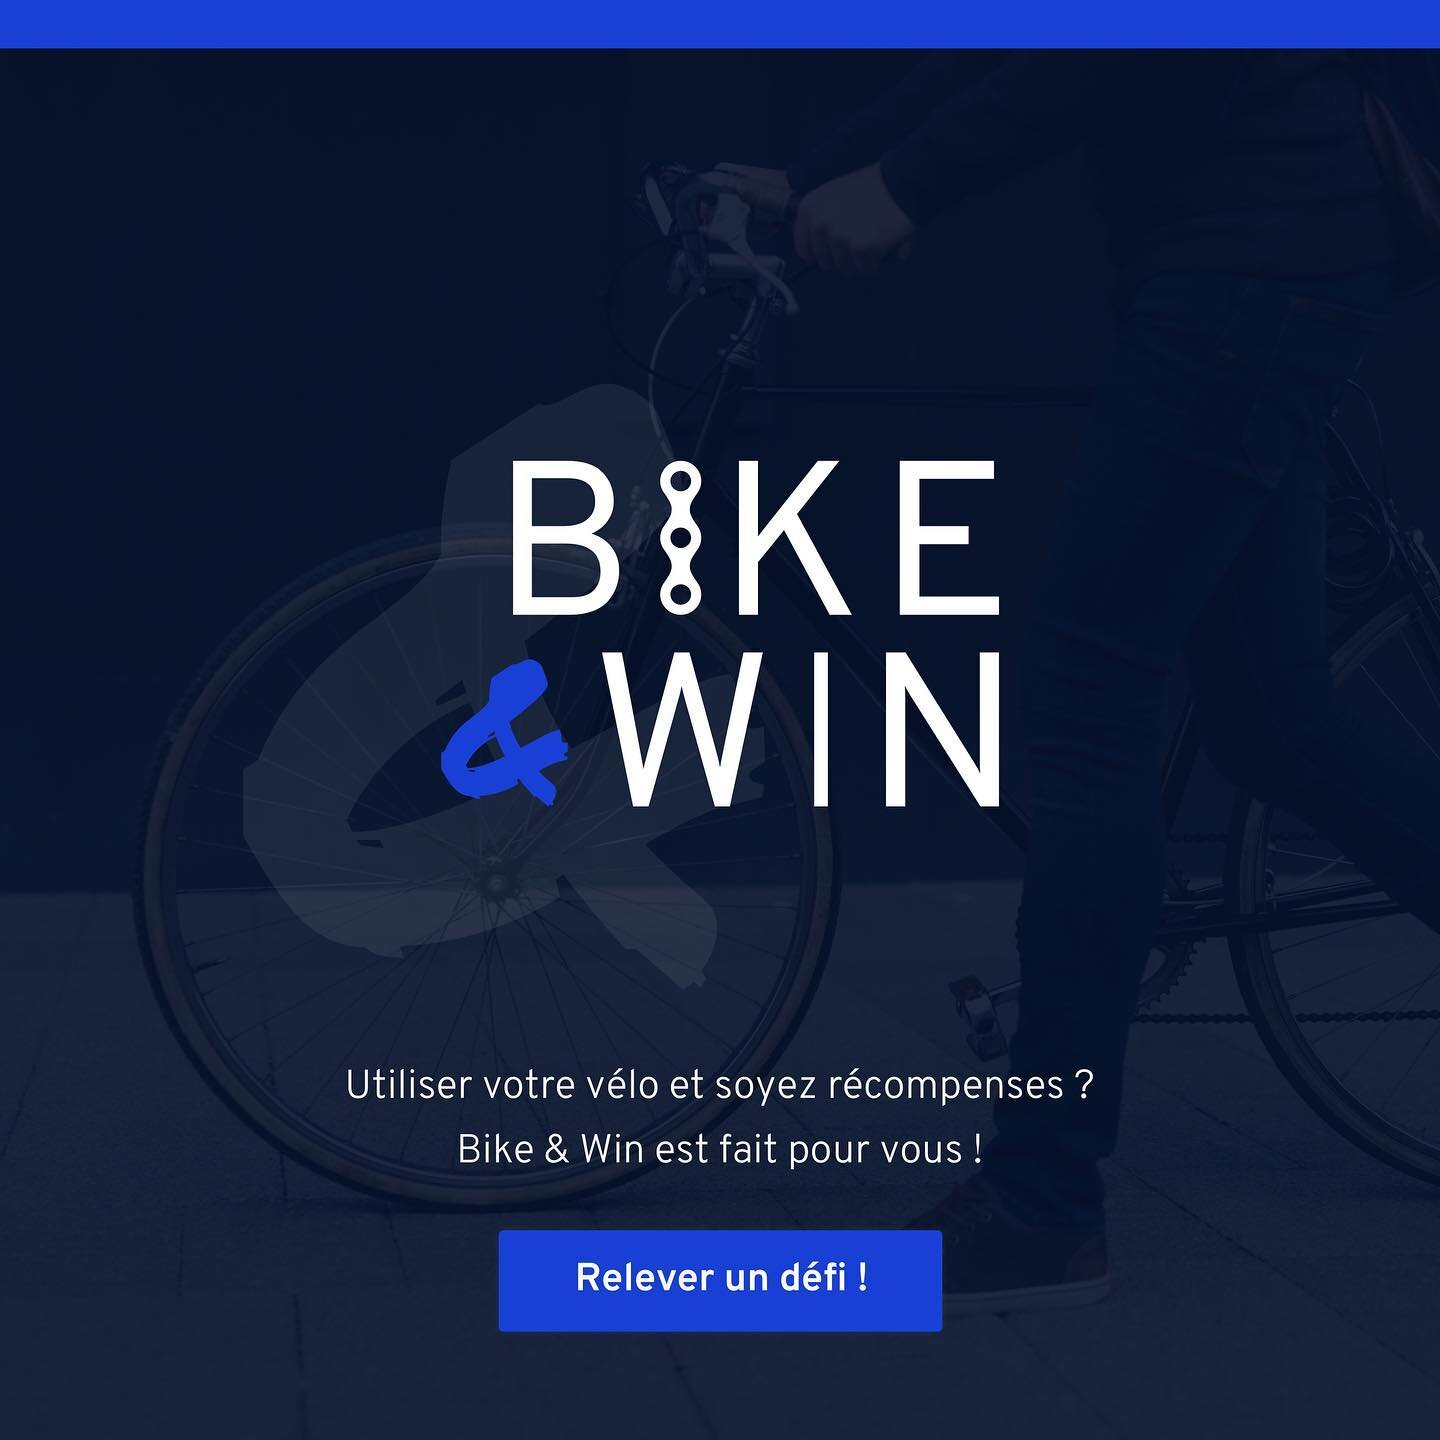 Bike &amp; Win &bull; Identity, UX &amp; UI project. When riding your bike becomes more fun and rewarding ! Choose your challenge, ride your bike &amp; win rewards such as cinema tickets, exhibition entrance, discounts,&hellip;

Create groups with yo